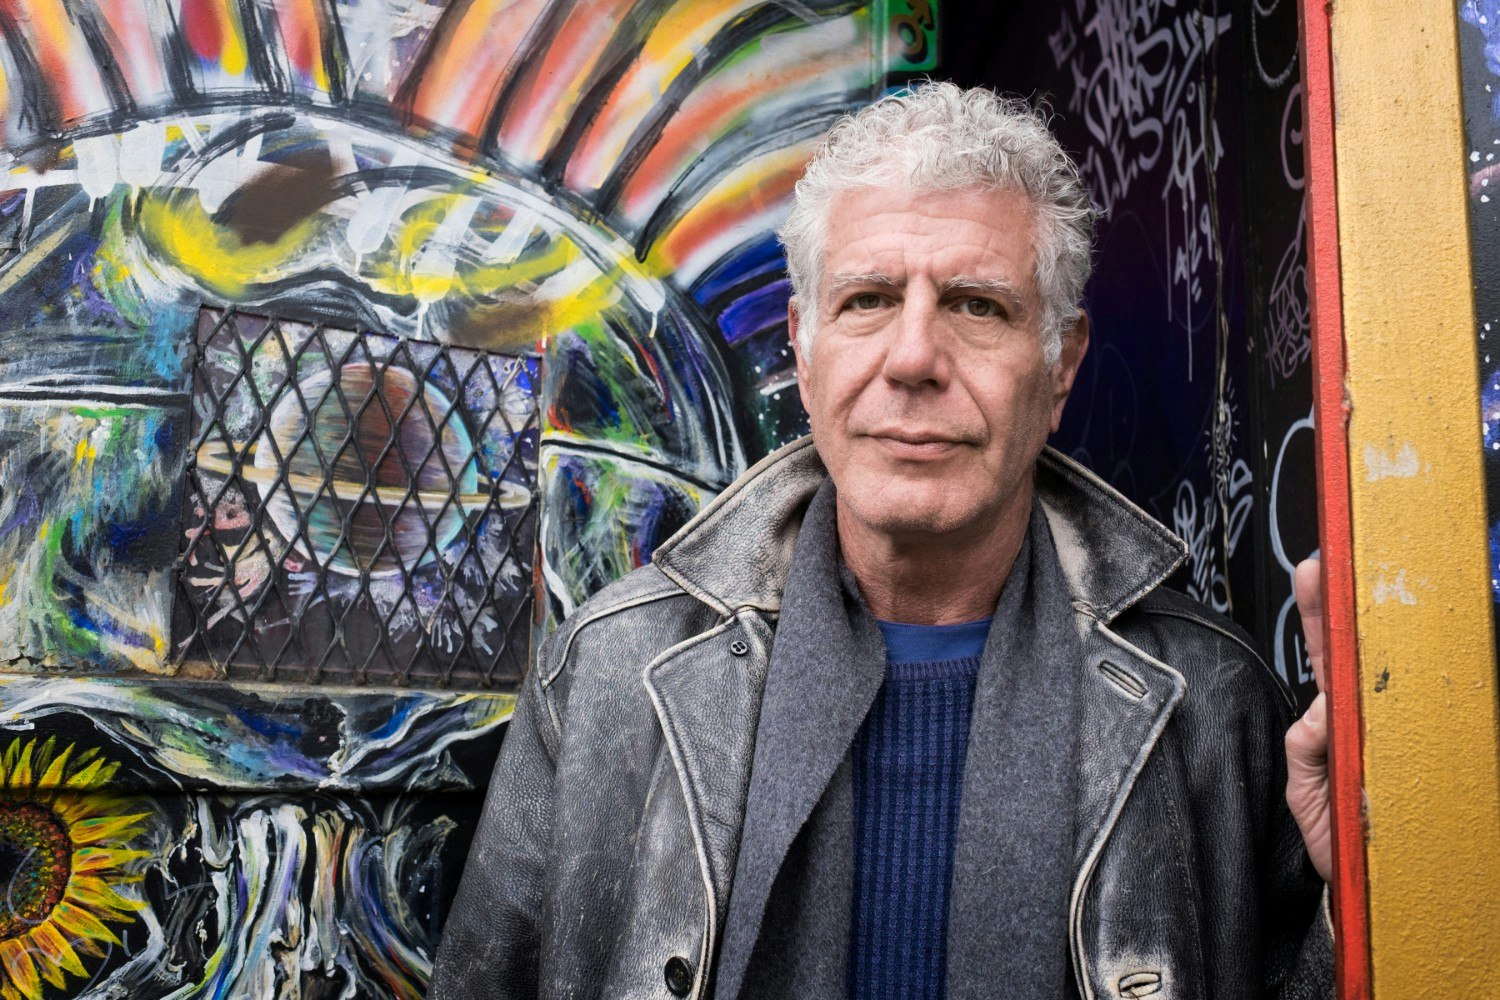 Anthony Bourdain at a decorated wall in the Lower East Side of New York CIty